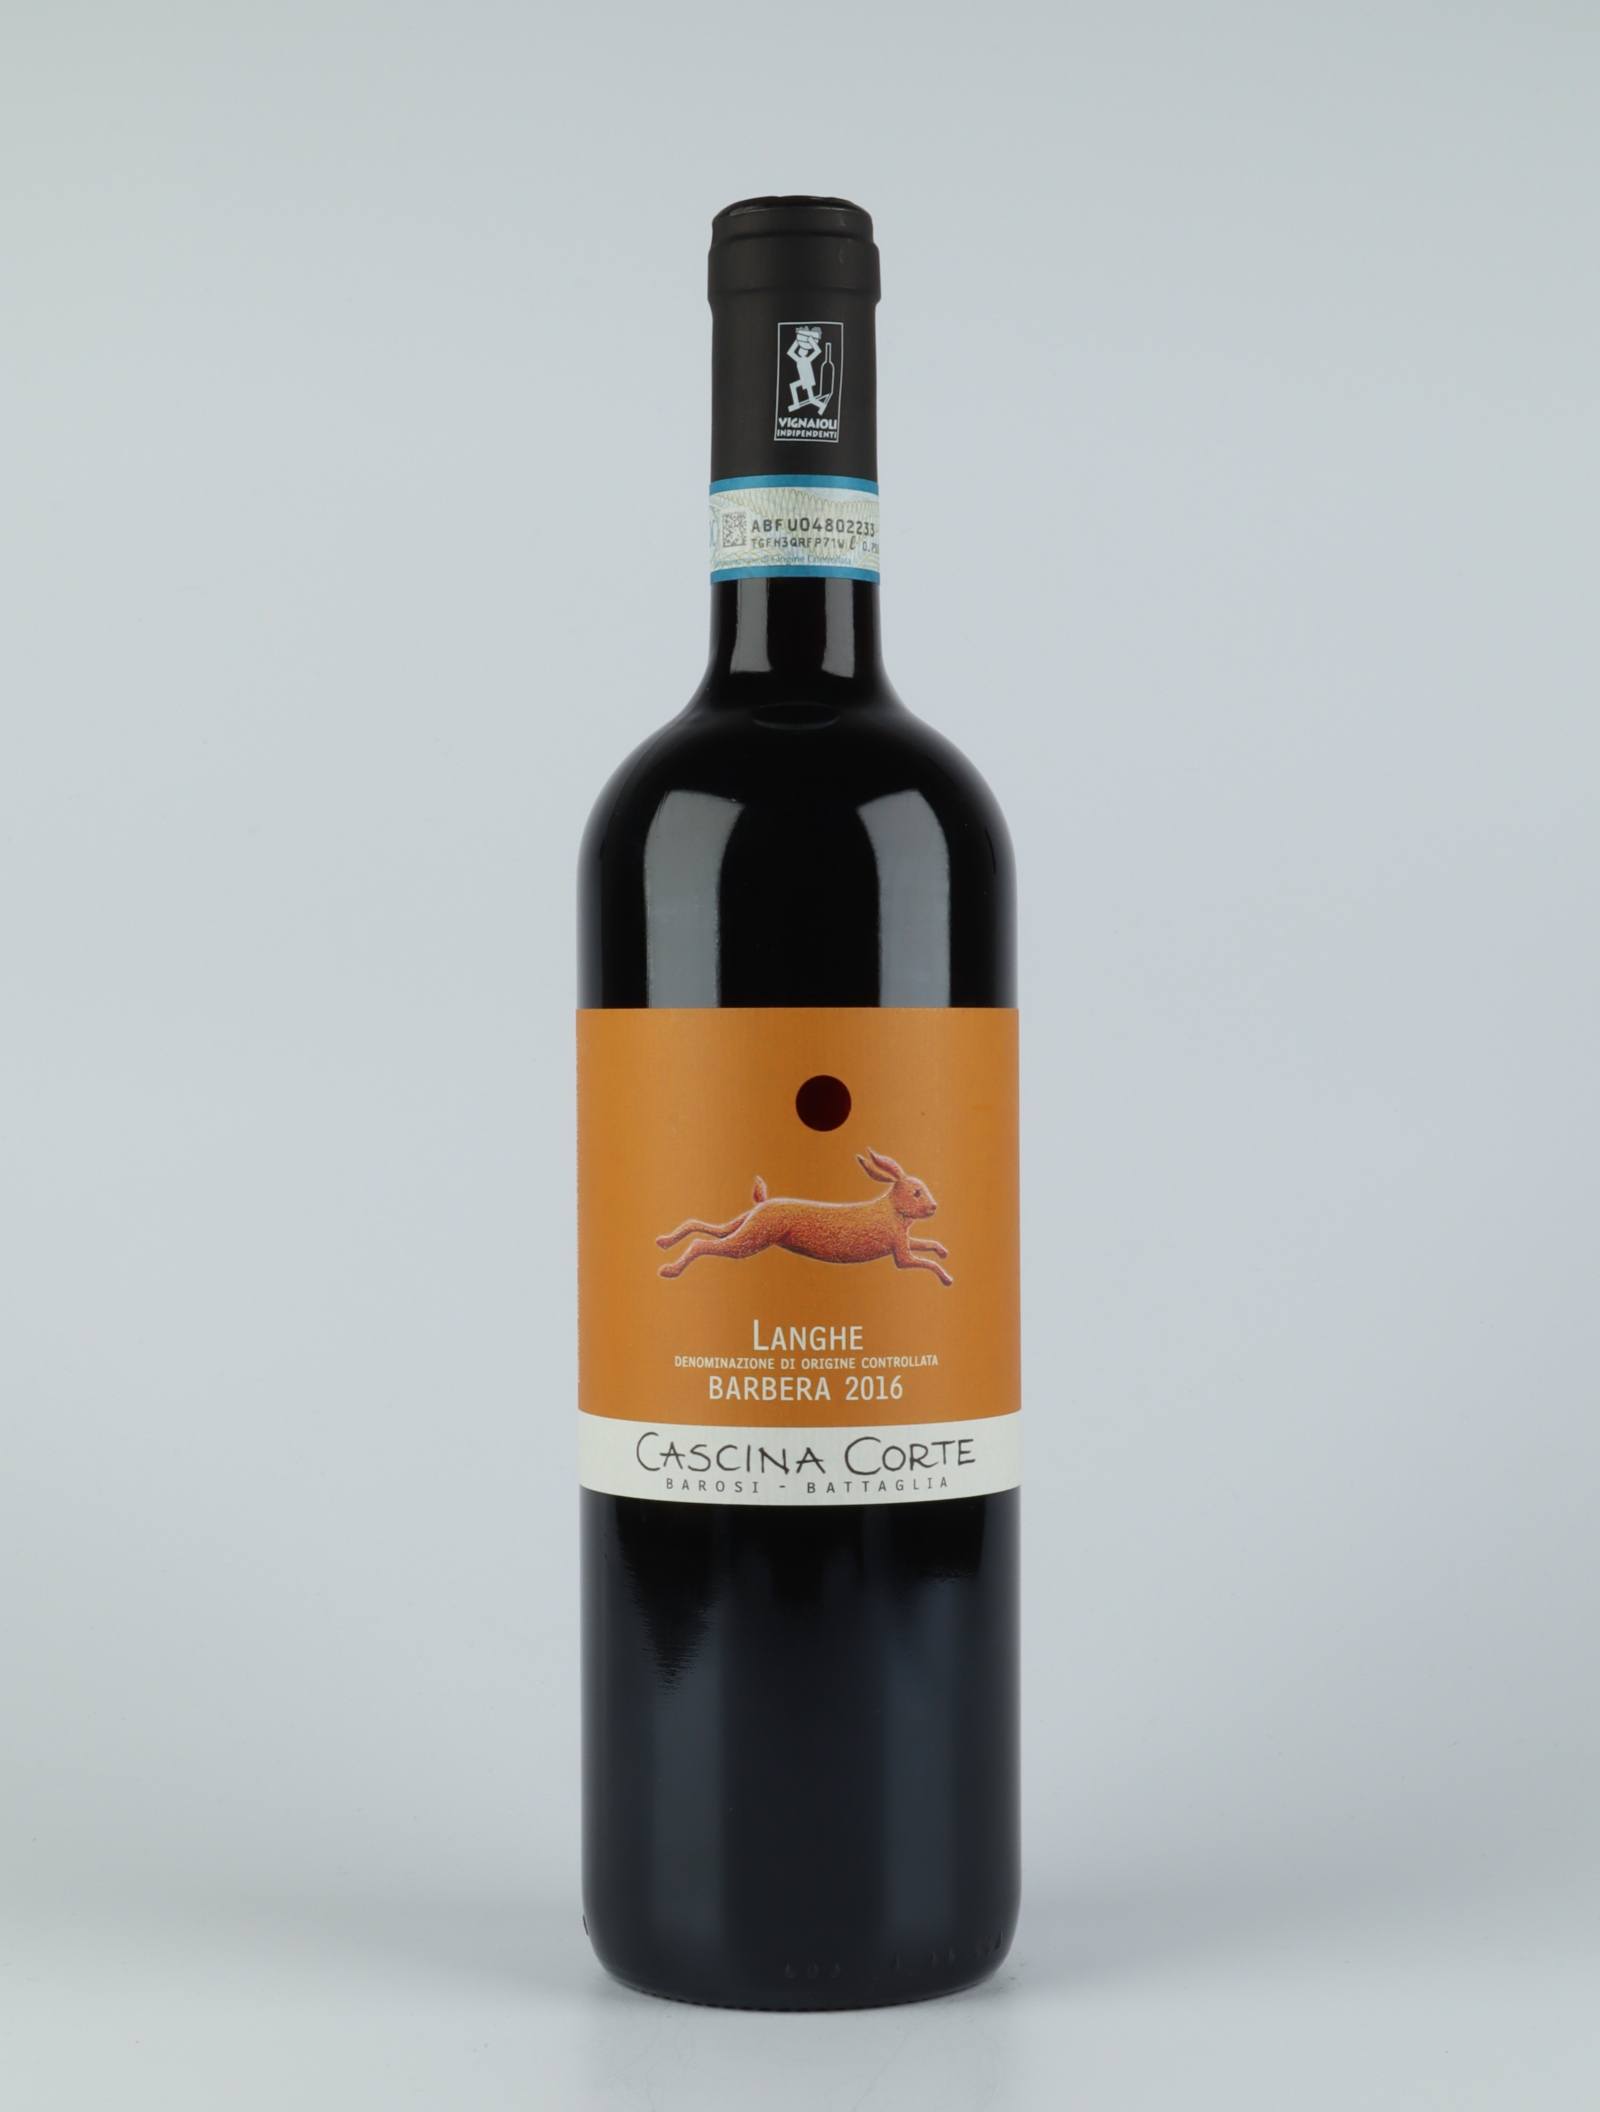 A bottle 2016 Barbera Red wine from Cascina Corte, Piedmont in Italy